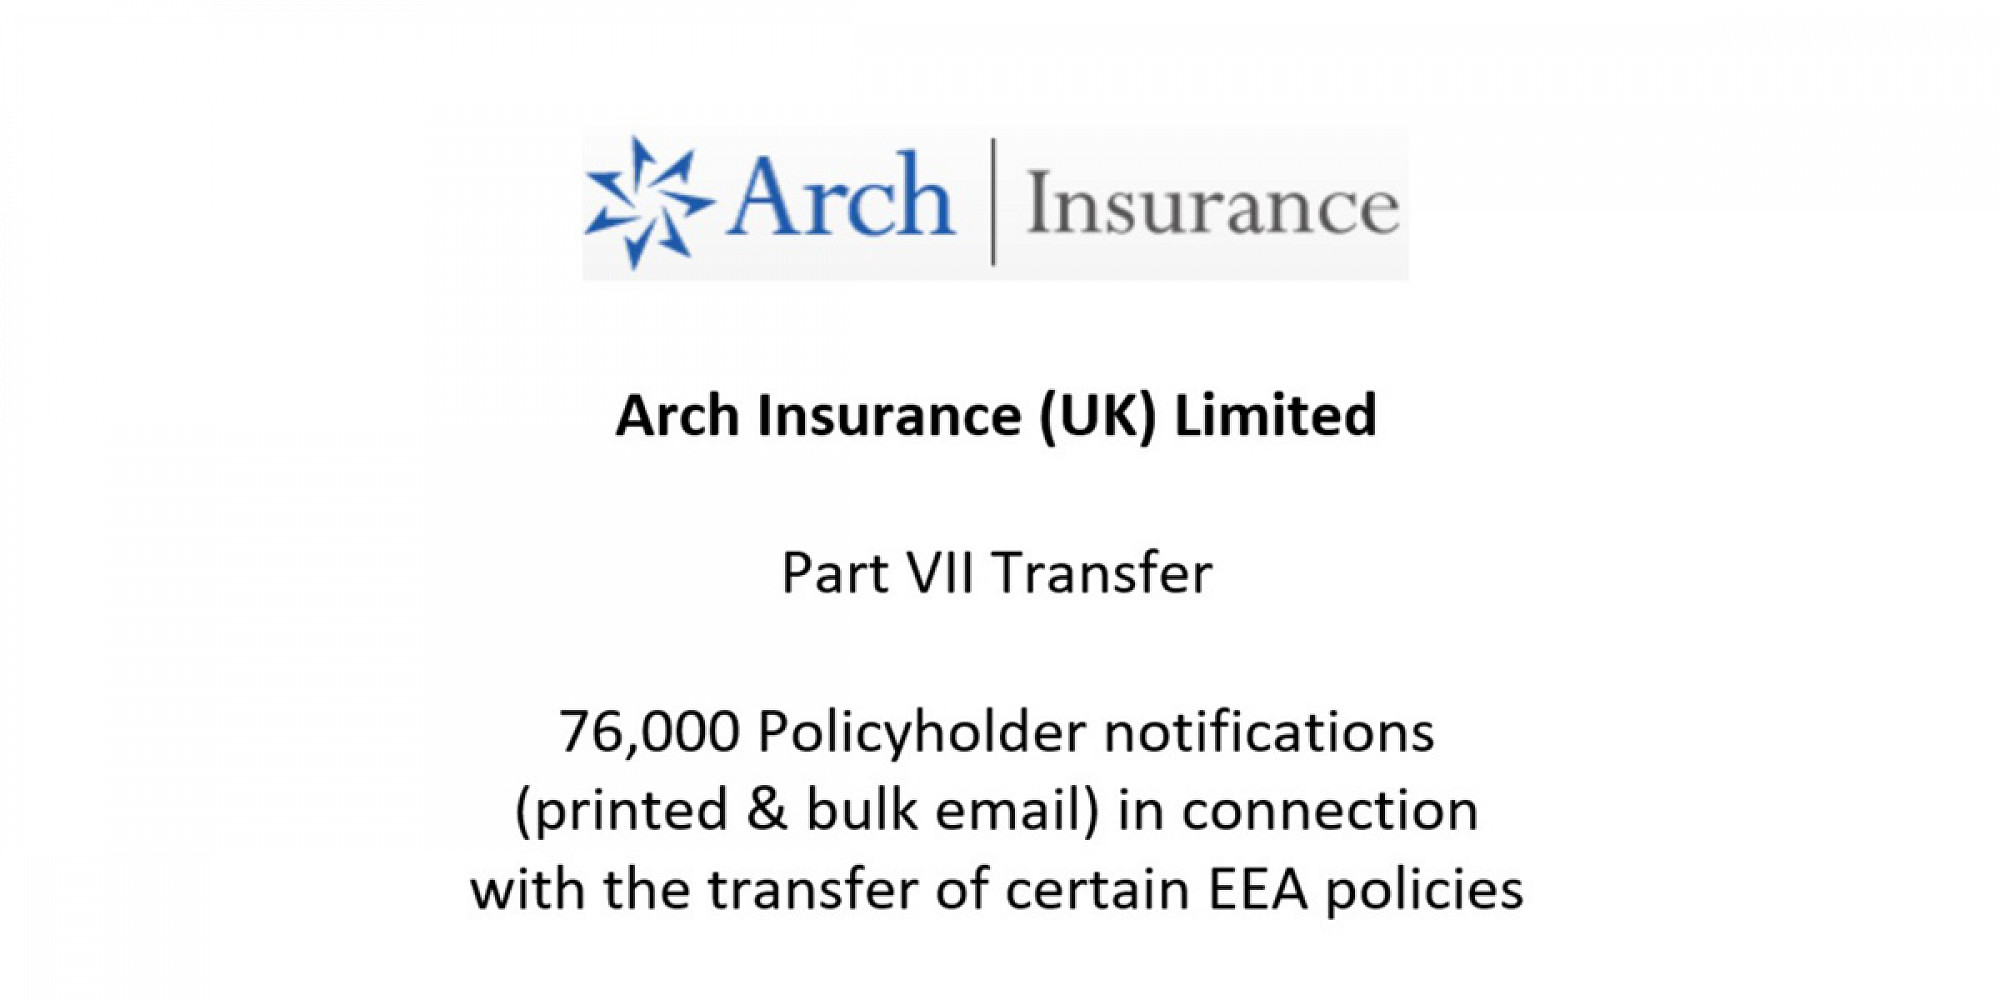 Arch Insurance (UK) Limited